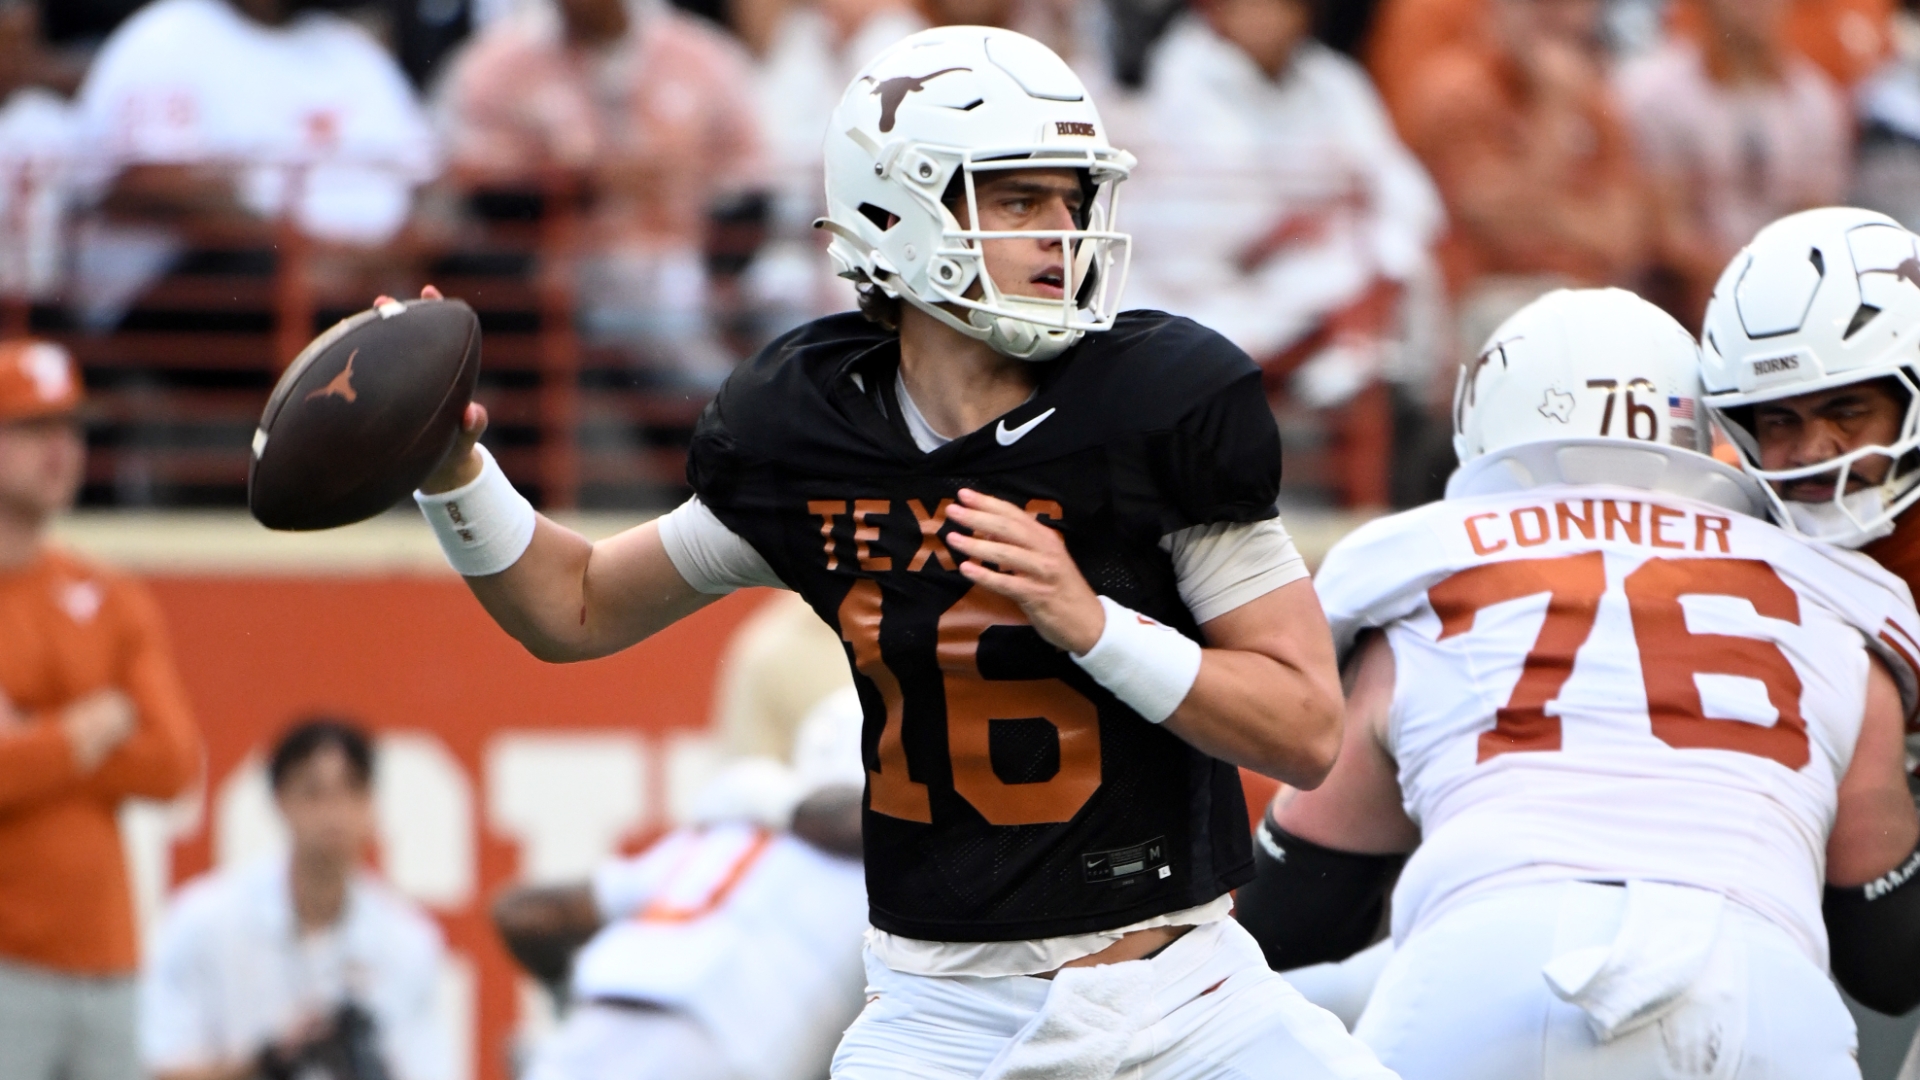 Arch Manning shines in Texas spring game with 3 TD passes